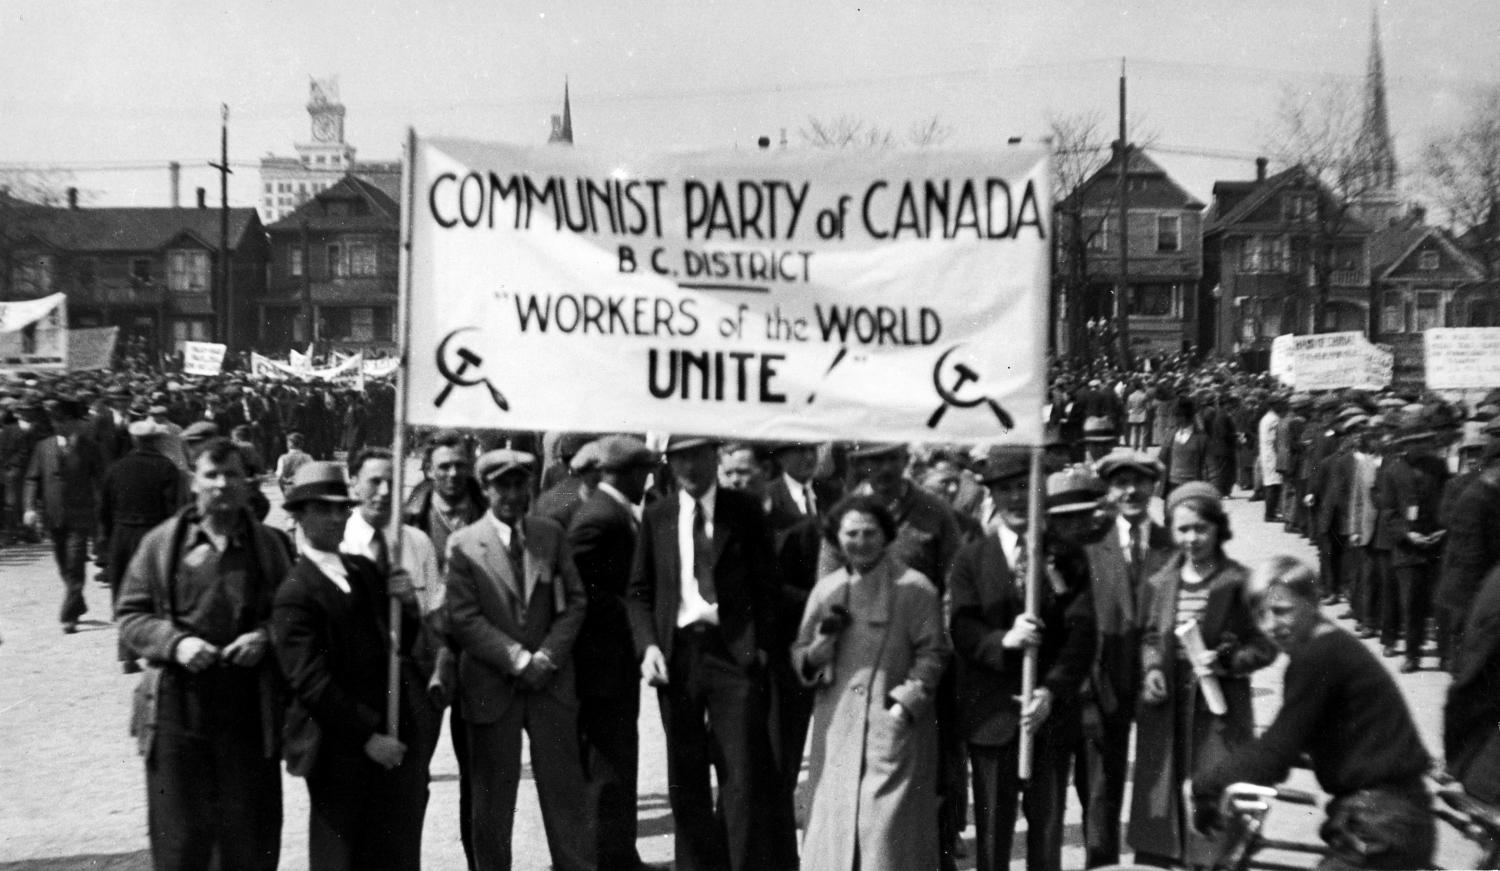 Communist Party members at a May Day march on the Cambie Street Grounds in the 1930s.